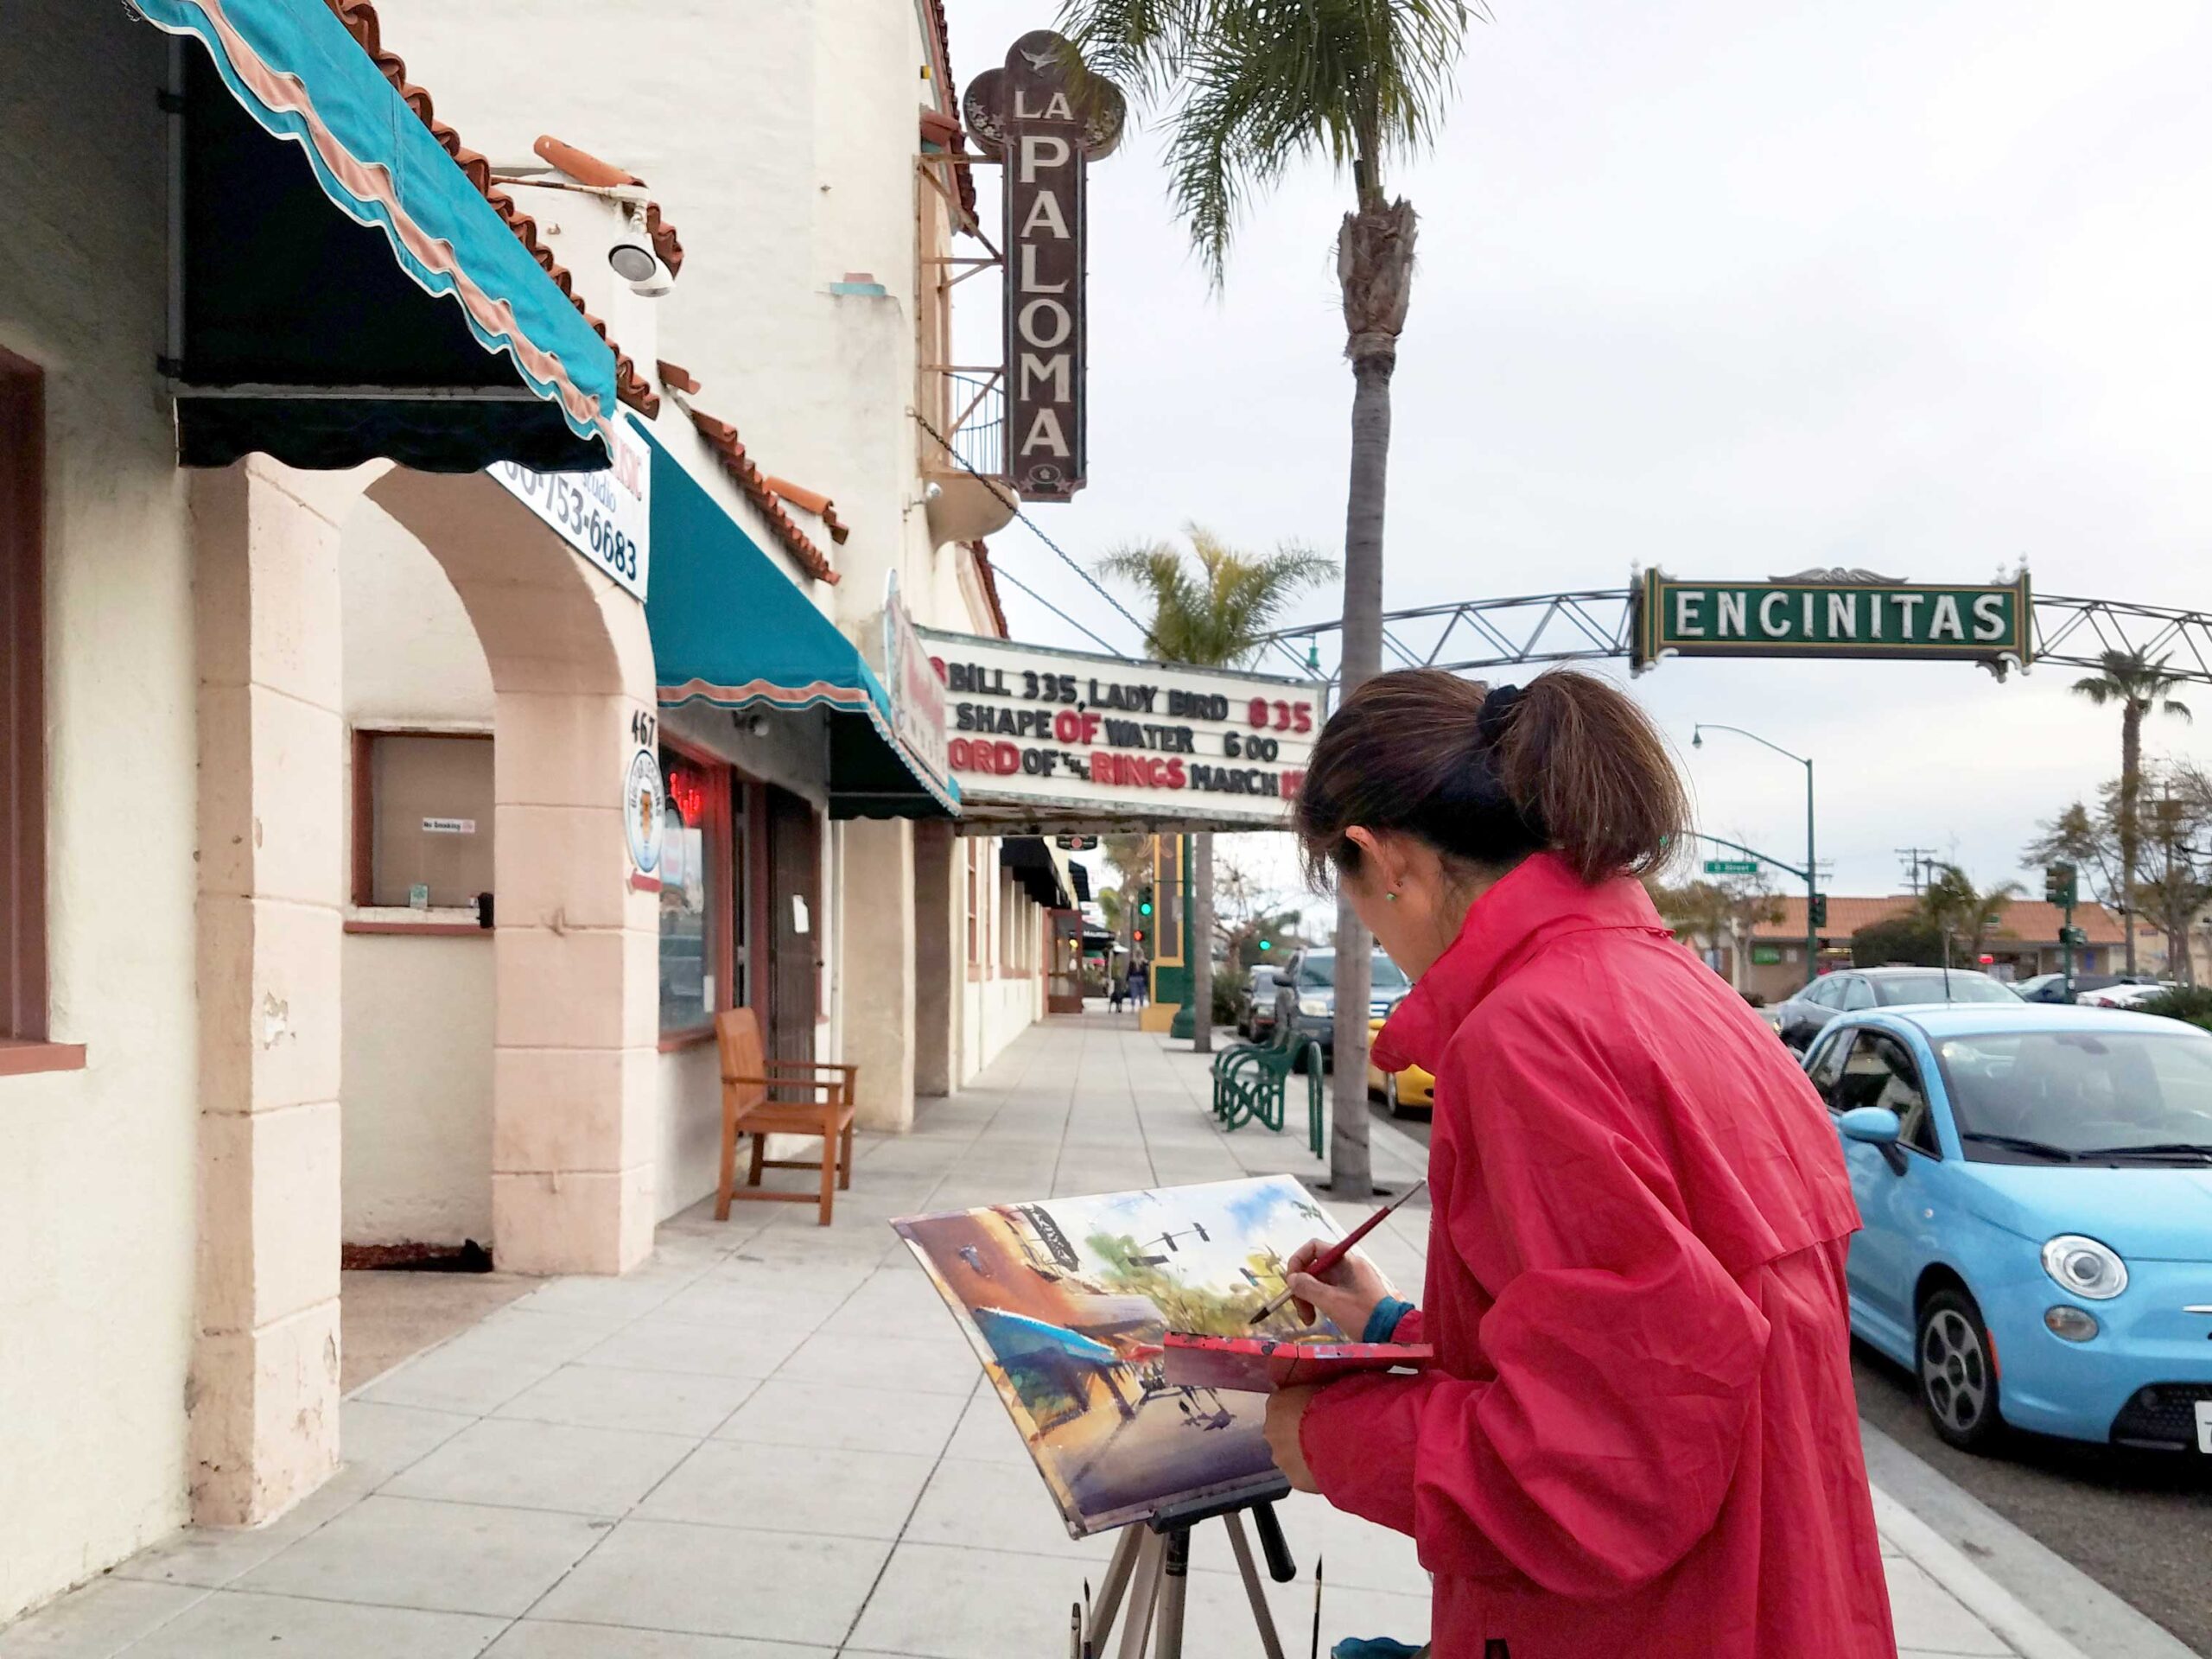 Keiko Tanabe paints La Paloma Theatre, a historic Spanish Colonial Revival-style movie theater in Encinitas, California.